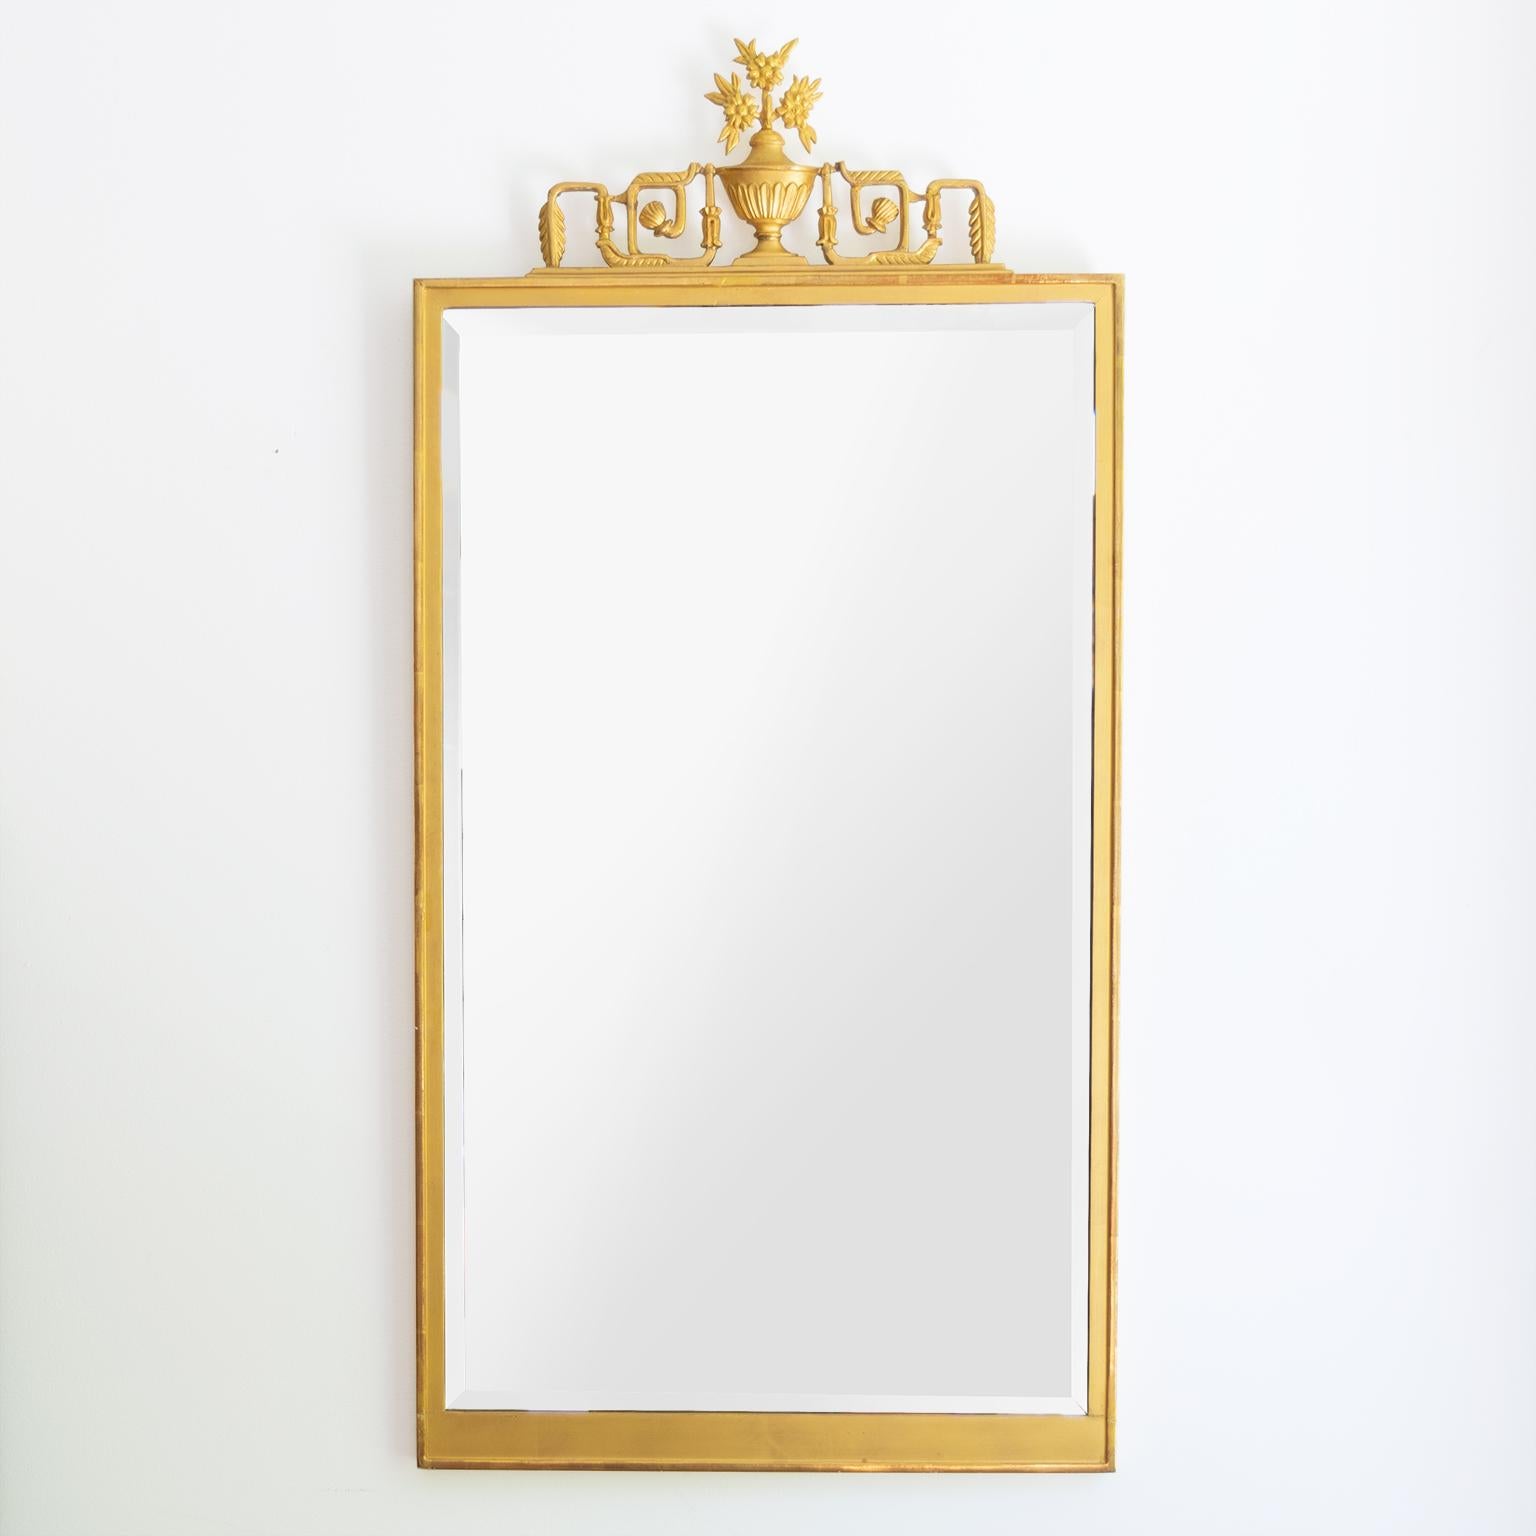 Scandinavian Modern, Swedish Grace, Art Deco giltwood mirror with decorative carving depicting a neoclassical urn flanked by a vine in the form of a meander motif. The mirror retains if original beveled mirror glass resting in a rectangular frame.